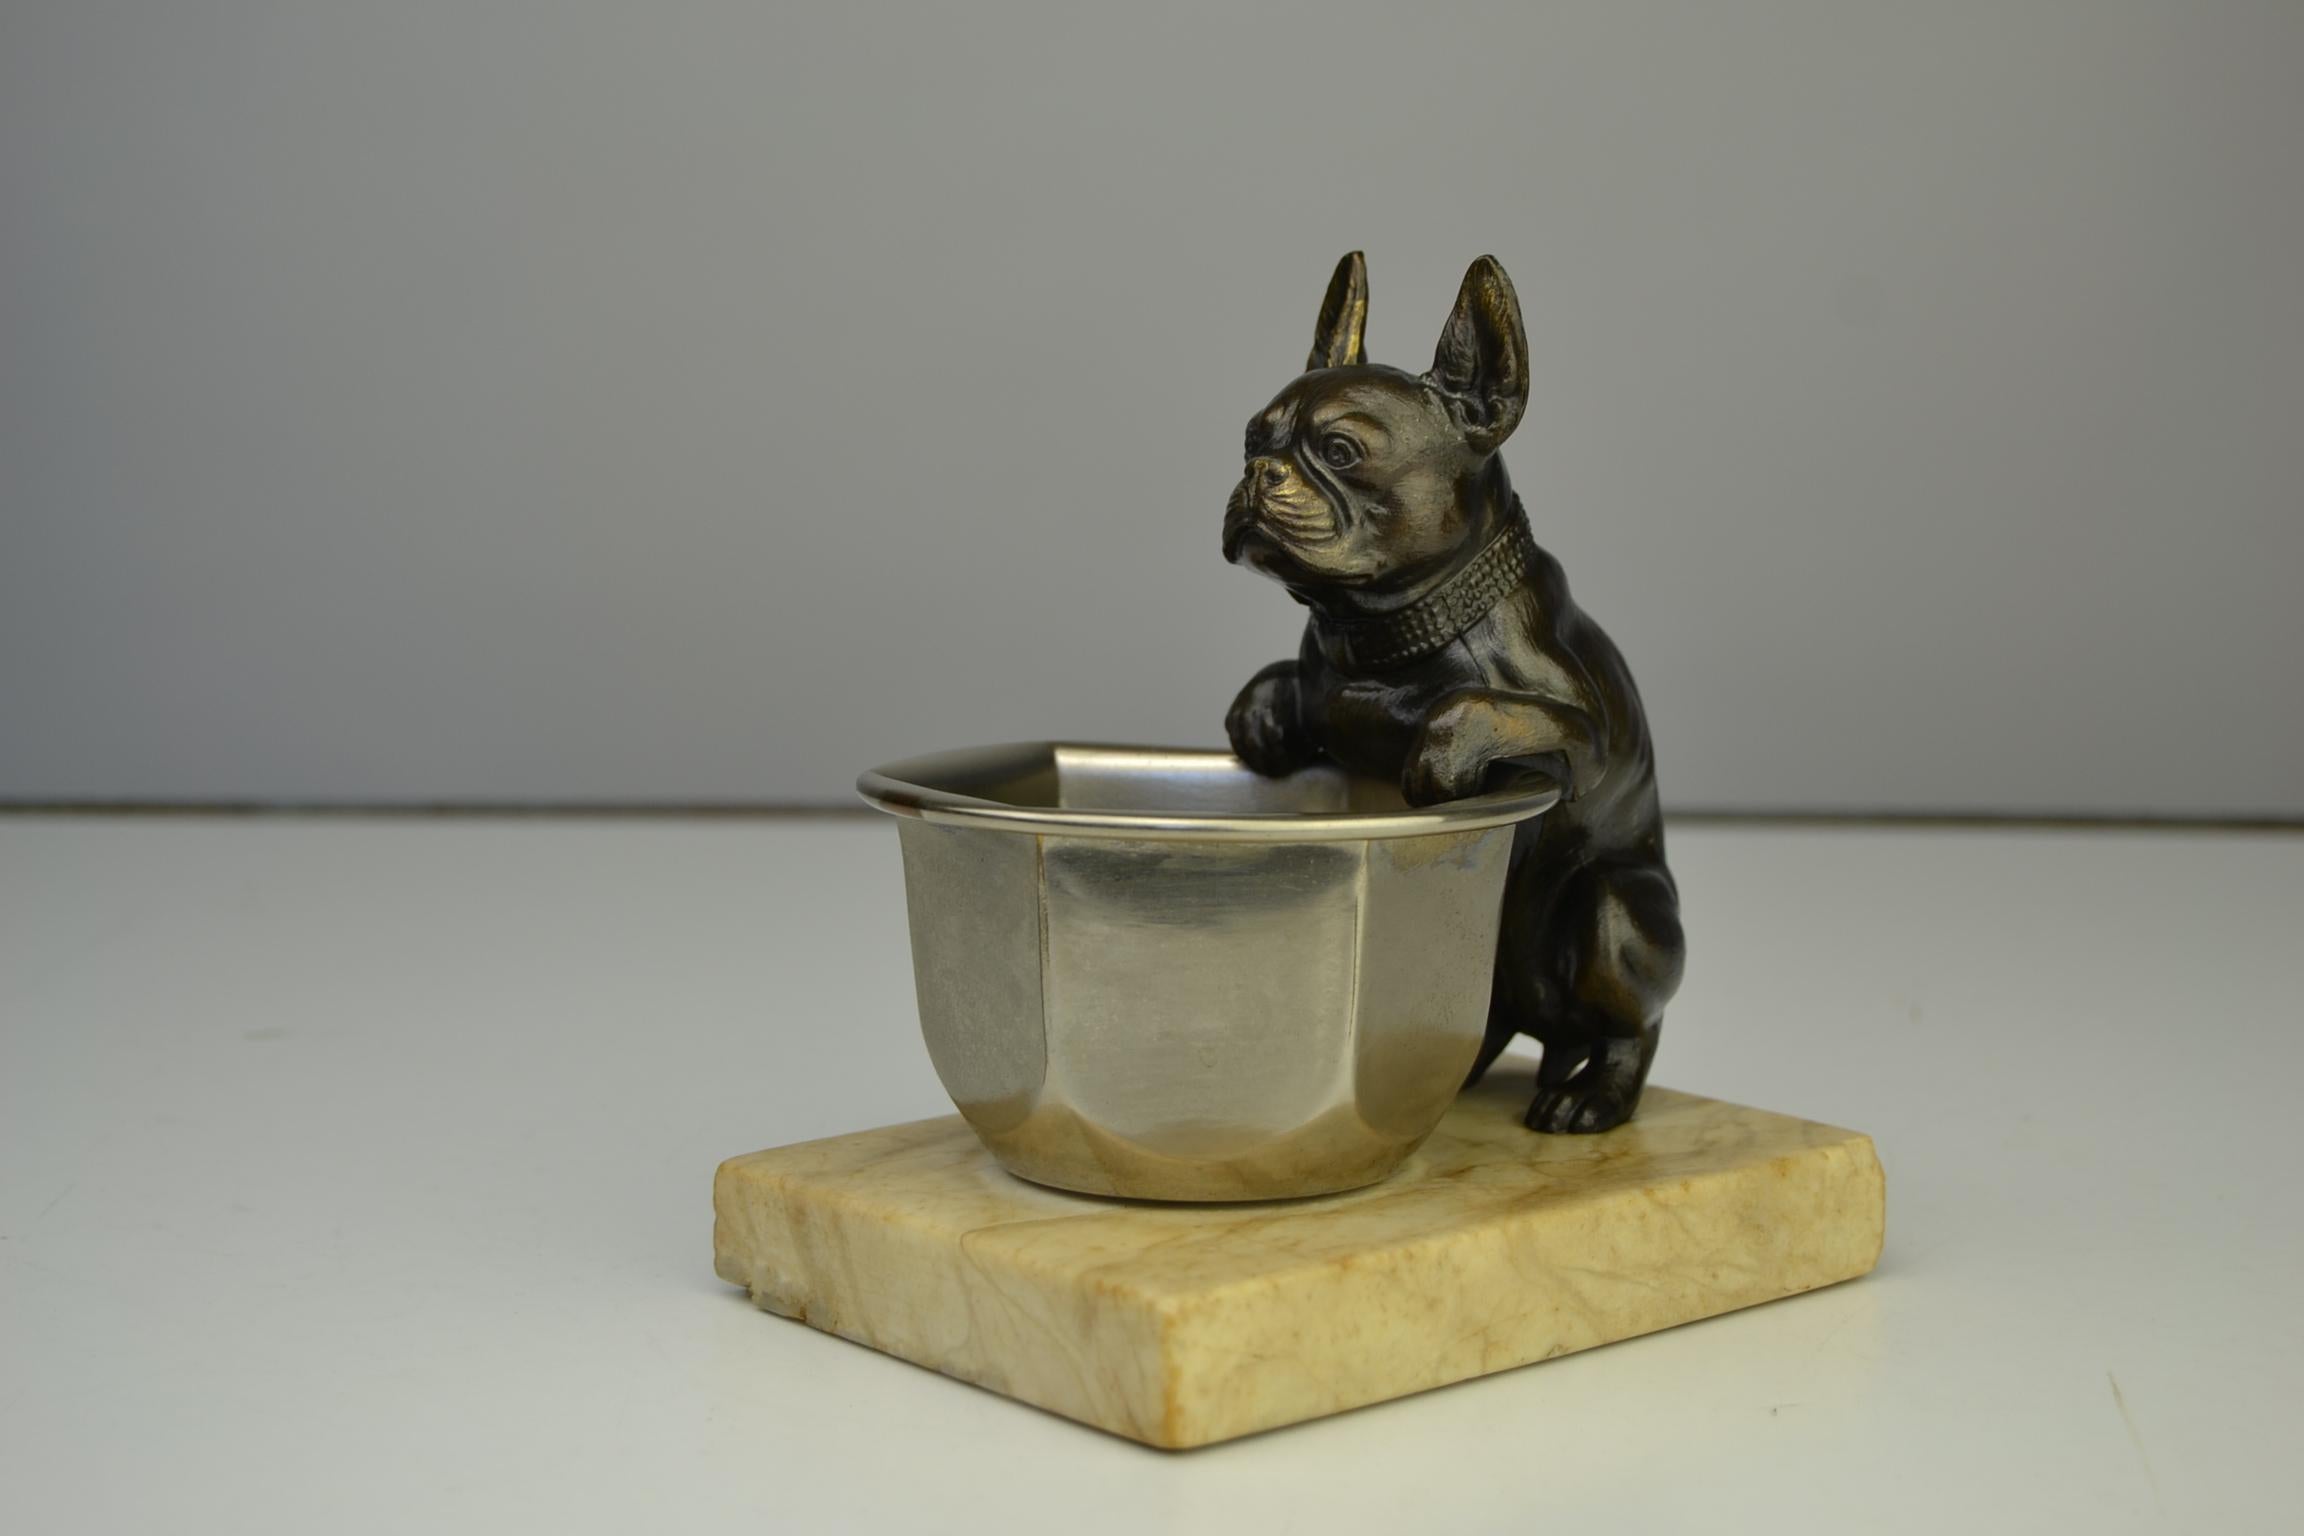 Art Deco French bulldog figurine hanging over a bowl and
mounted on a marble base. 

The bronze colored metal dog sculpture is very detailed.
Look at the snout, the collar and paws.
The metal bowl has a beautiful and rounded hexagonal shape.